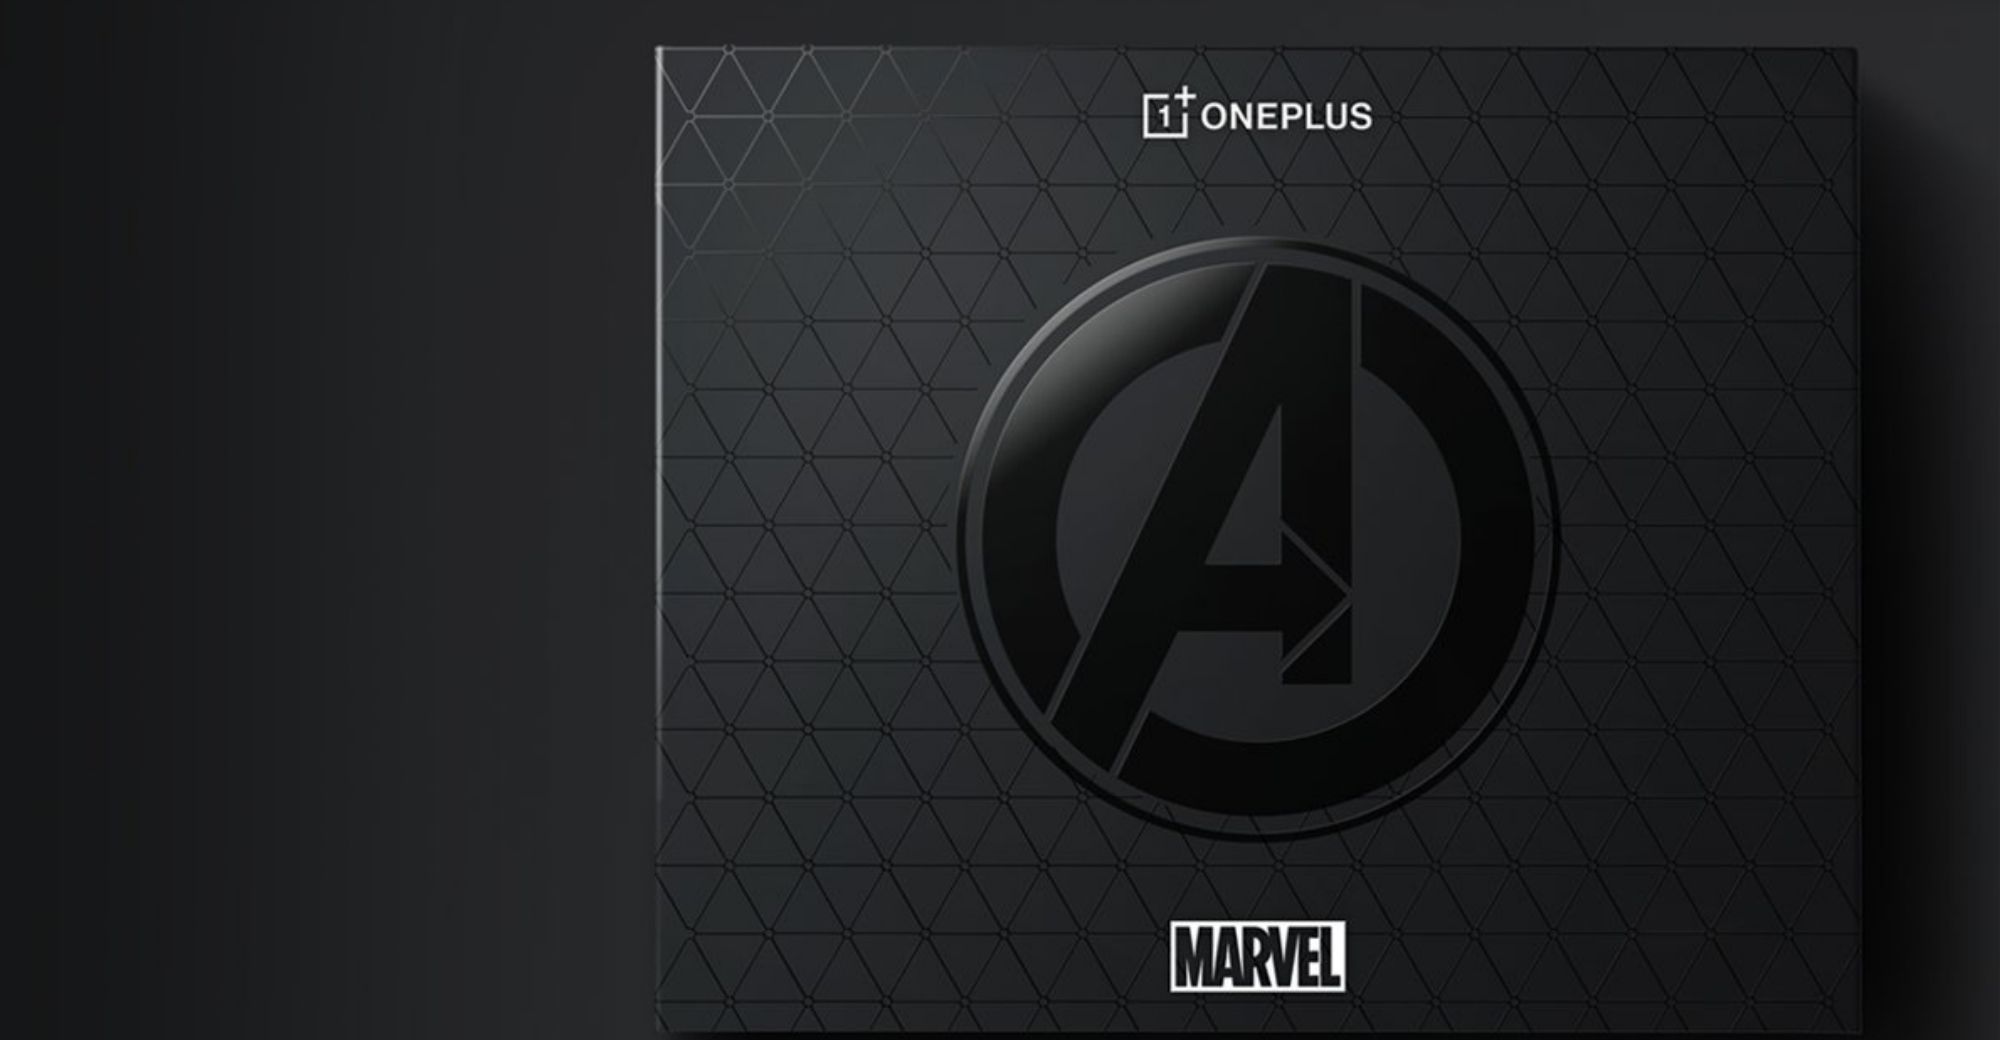 OnePlus 10T Marvel Edition Smartphone to Debut in India